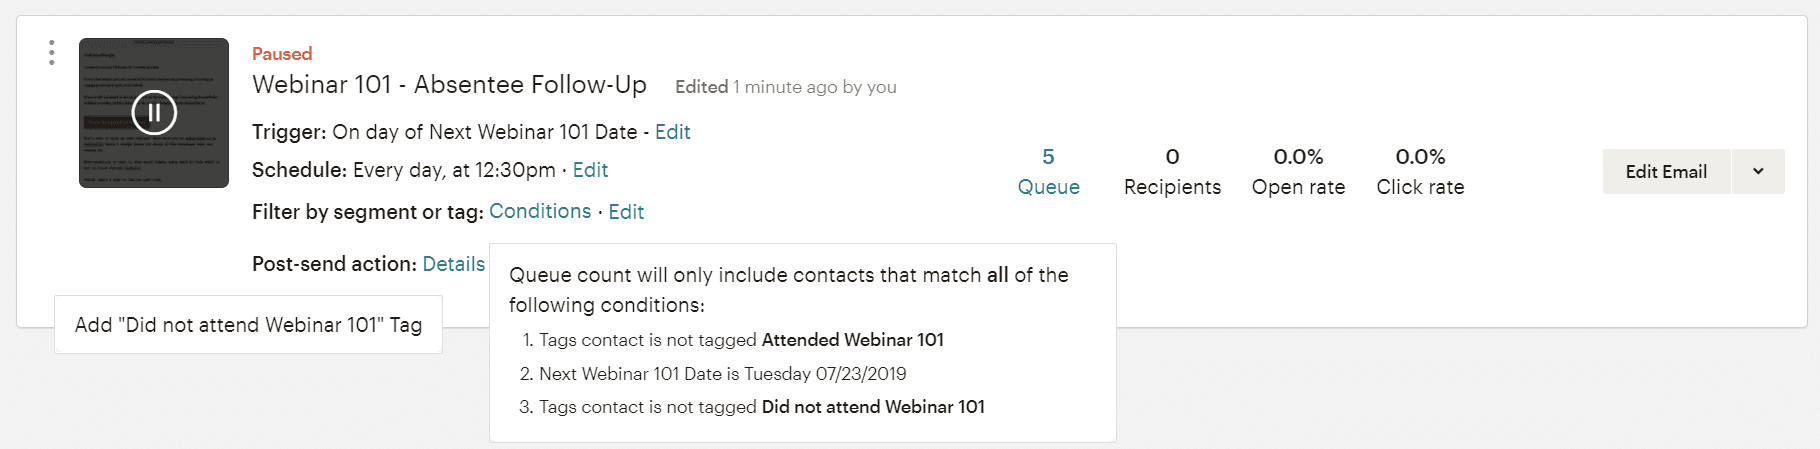 Conditions for sending a Webinar Follow-up for Absentees with MailChimp